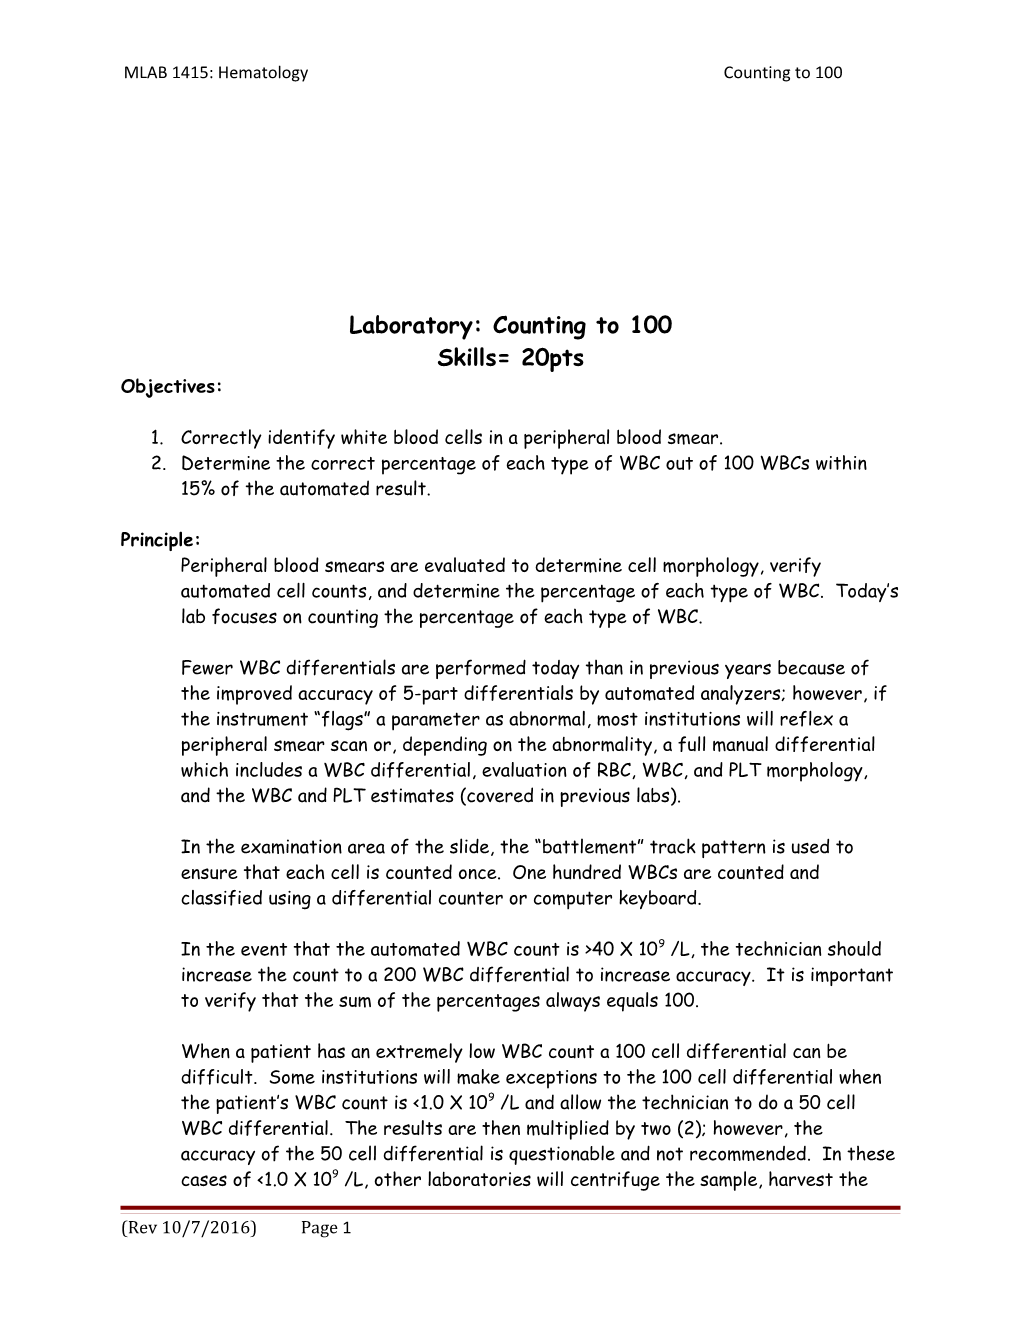 Laboratory: Counting to 100